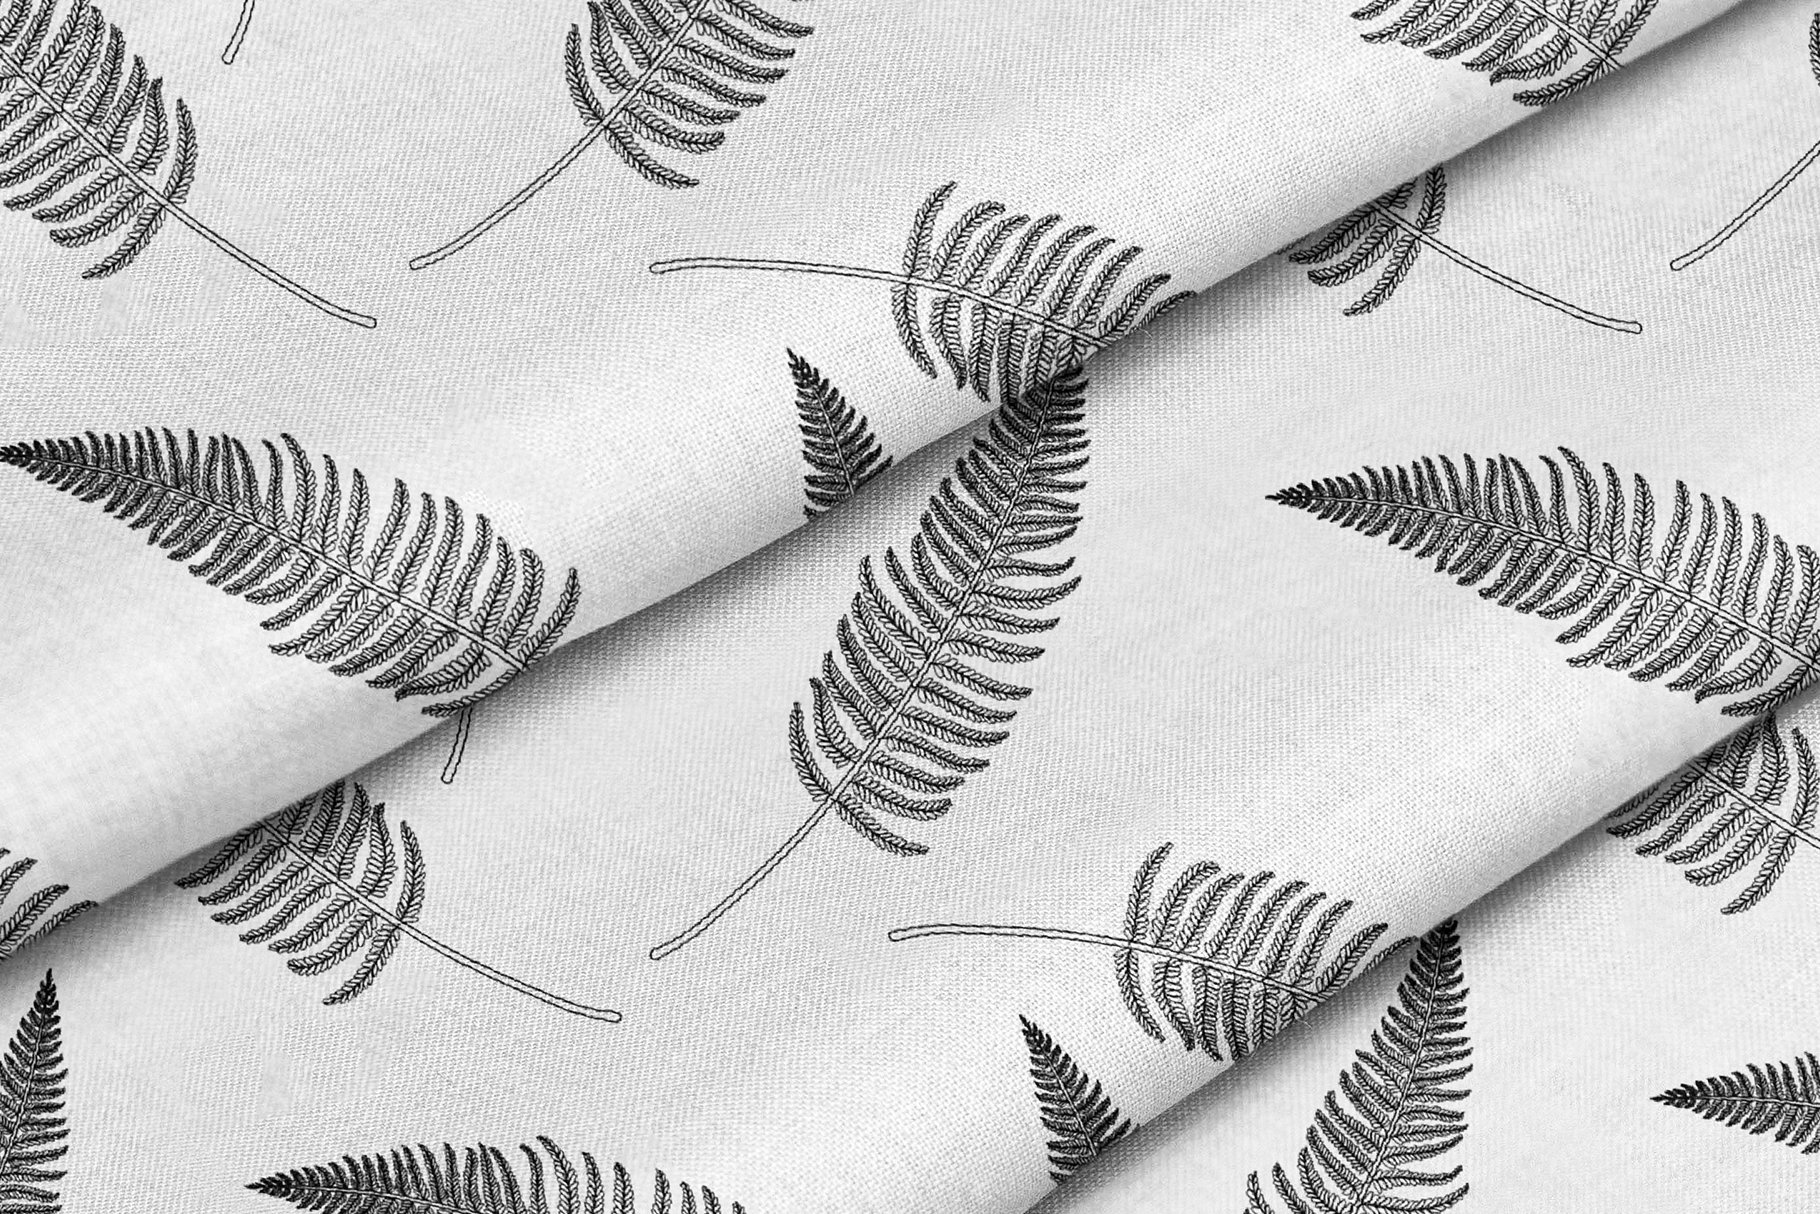 White fabric with black leaves on it.